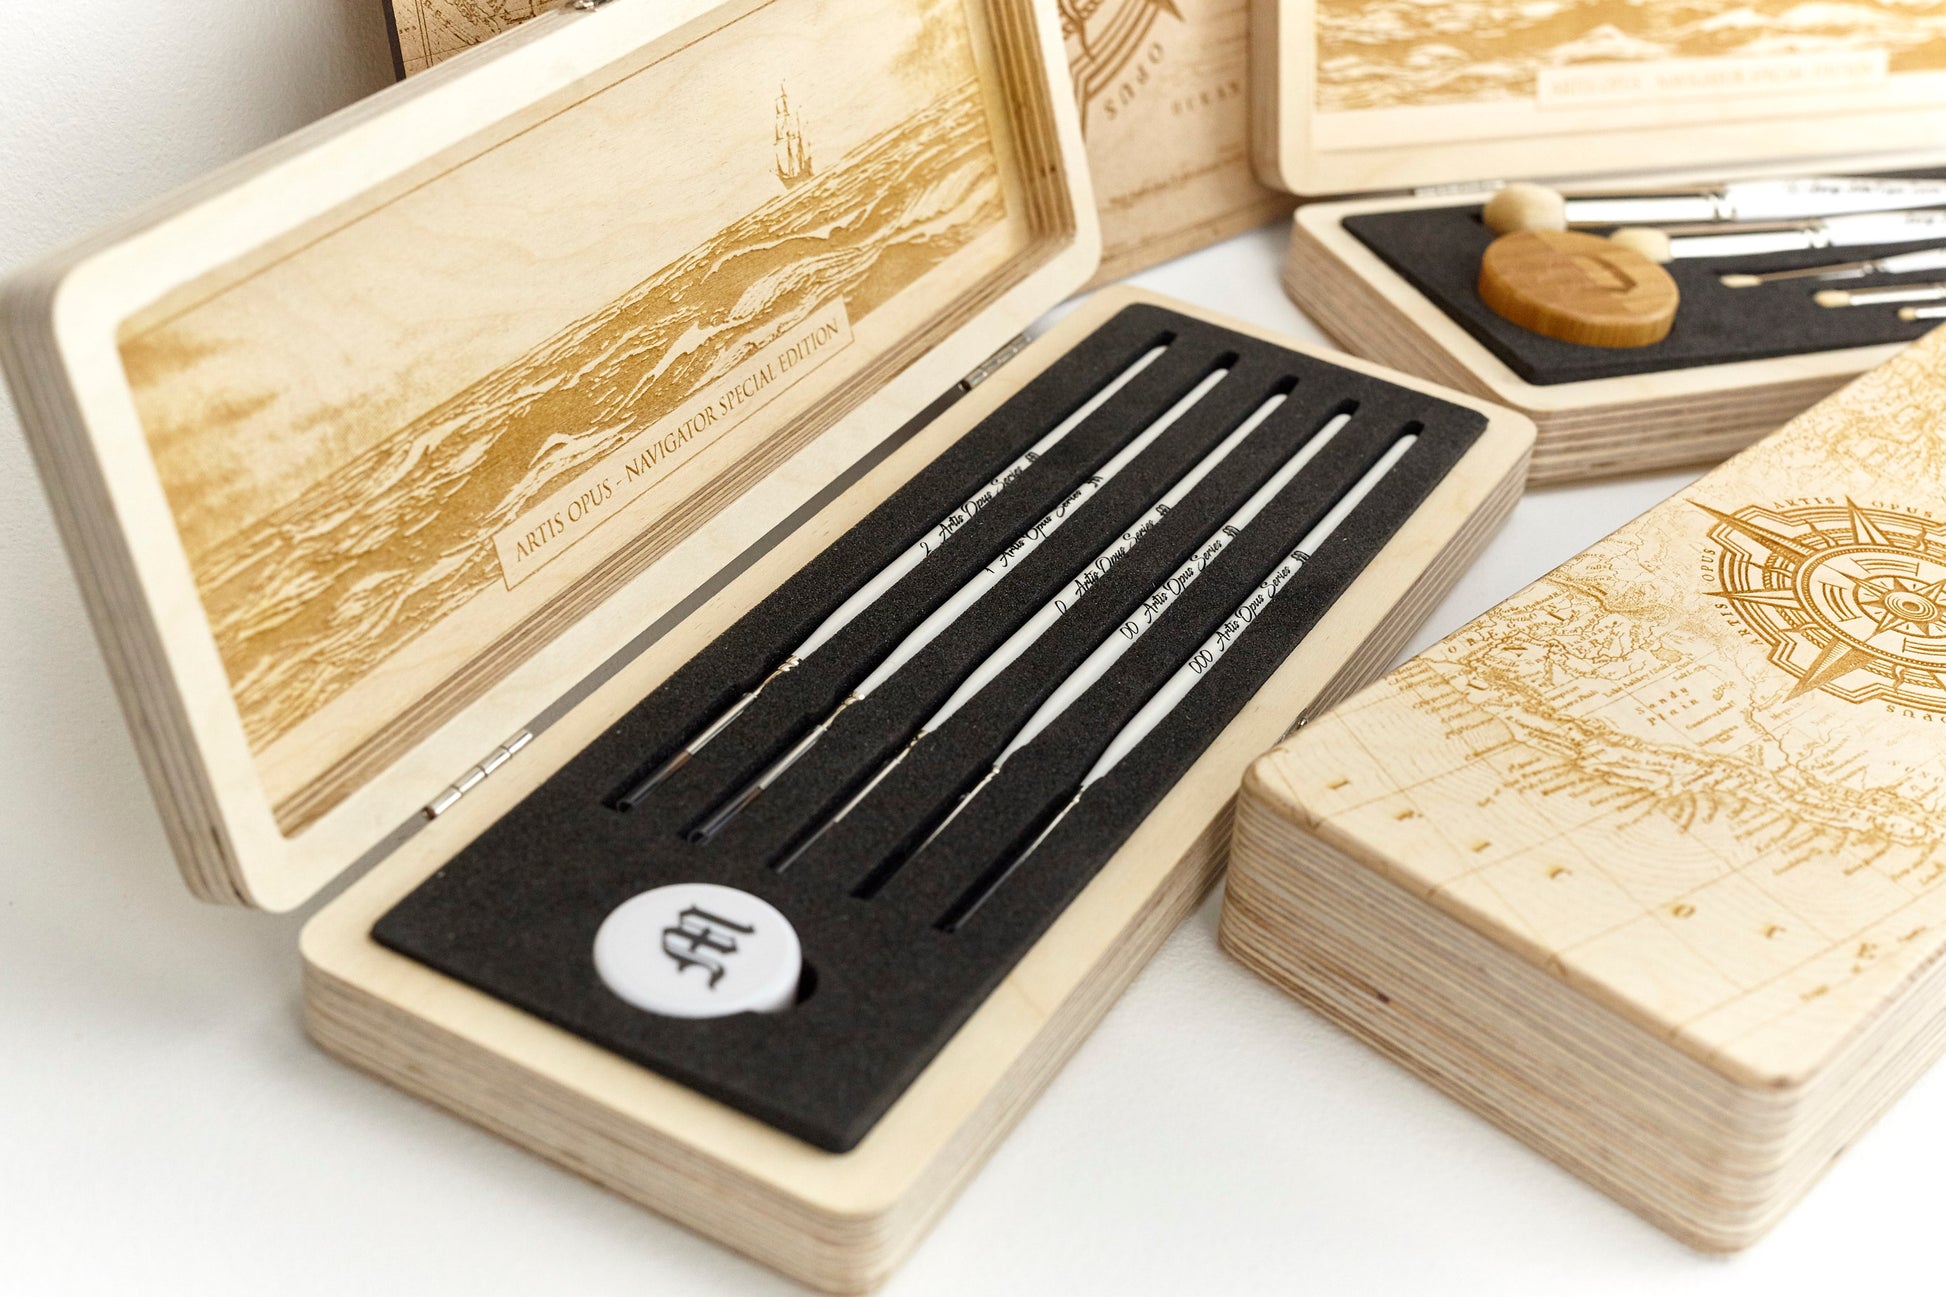 Navigator Special Edition - 5 brush sets for S, M, and D! 